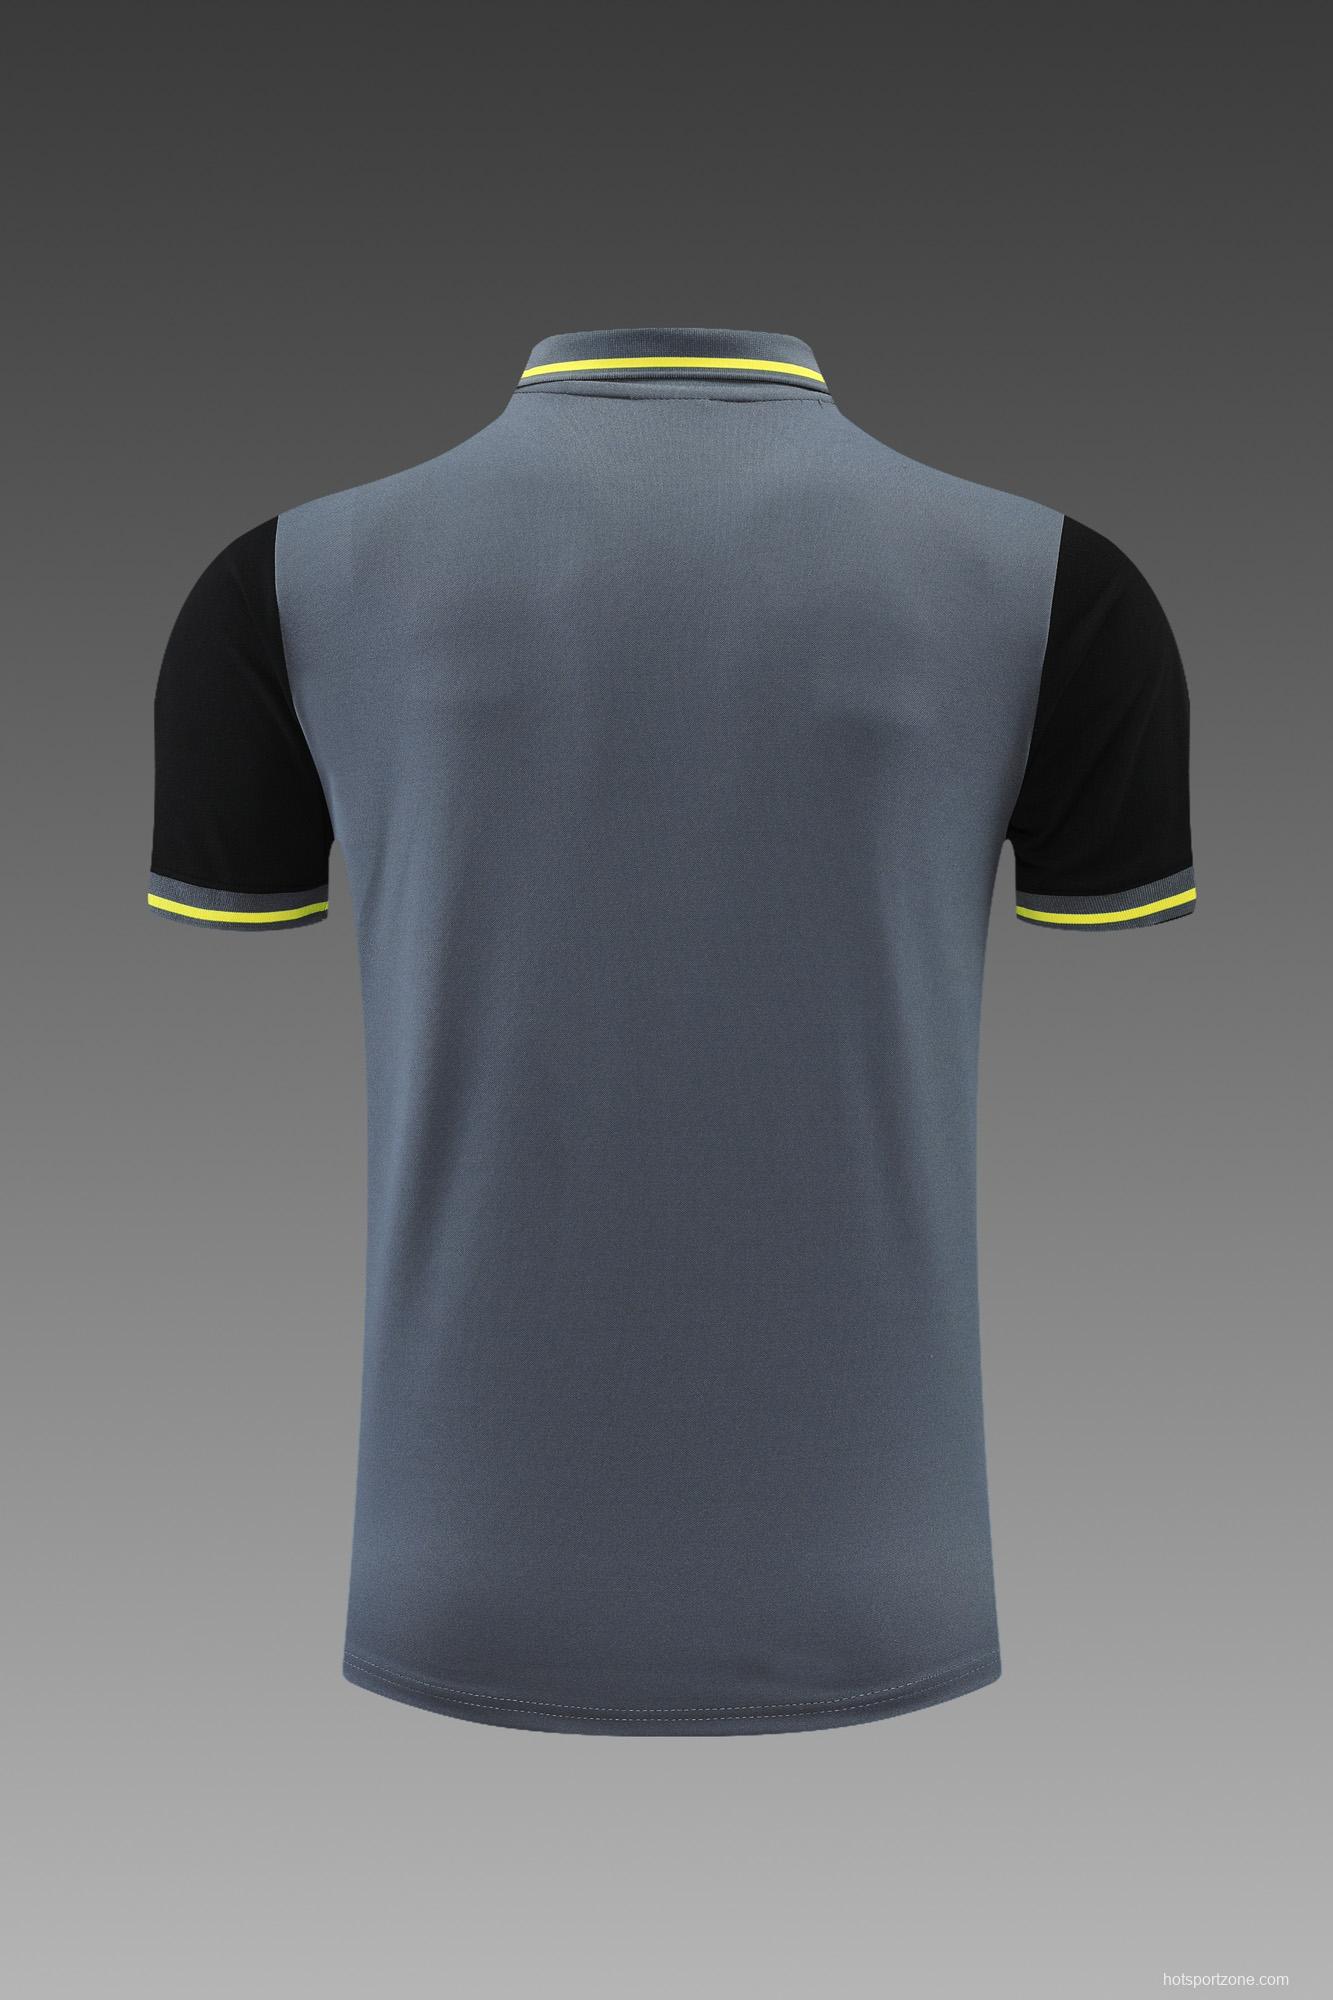 Borussia Dortmund POLO kit Grey Black (not supported to be sold separately)